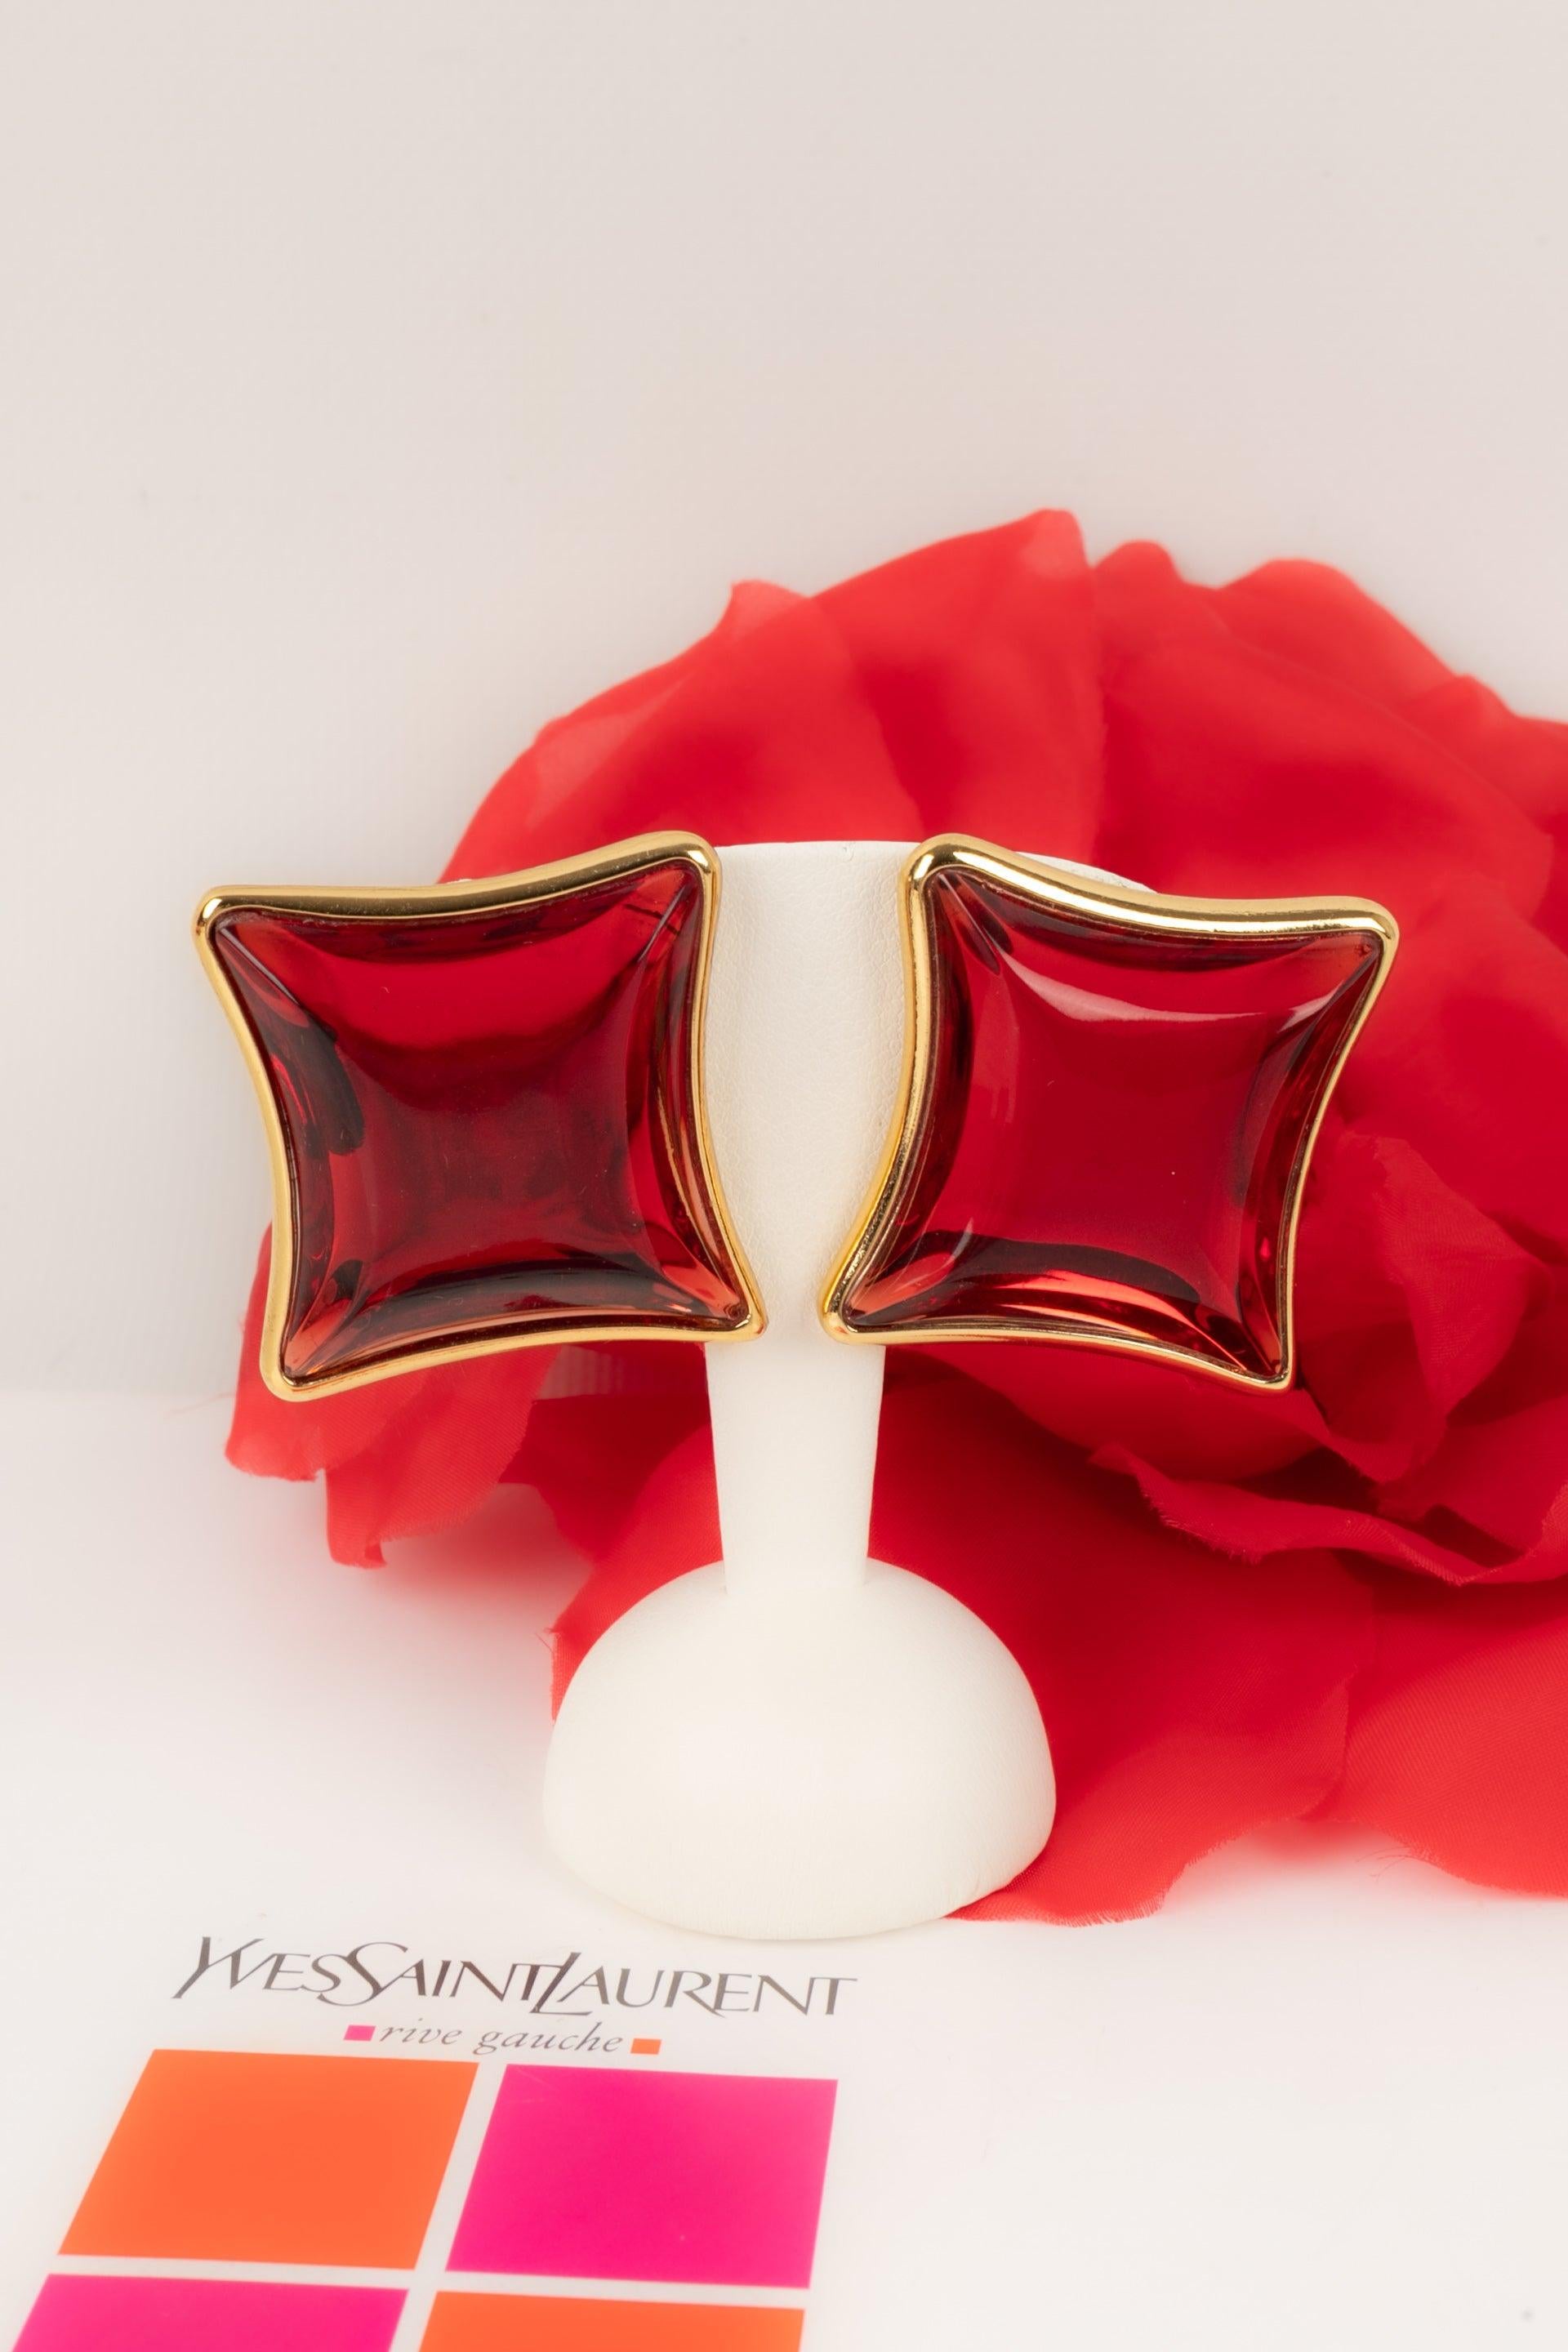 Yves Saint Laurent Golden Metal Earrings with Red Resin For Sale 4